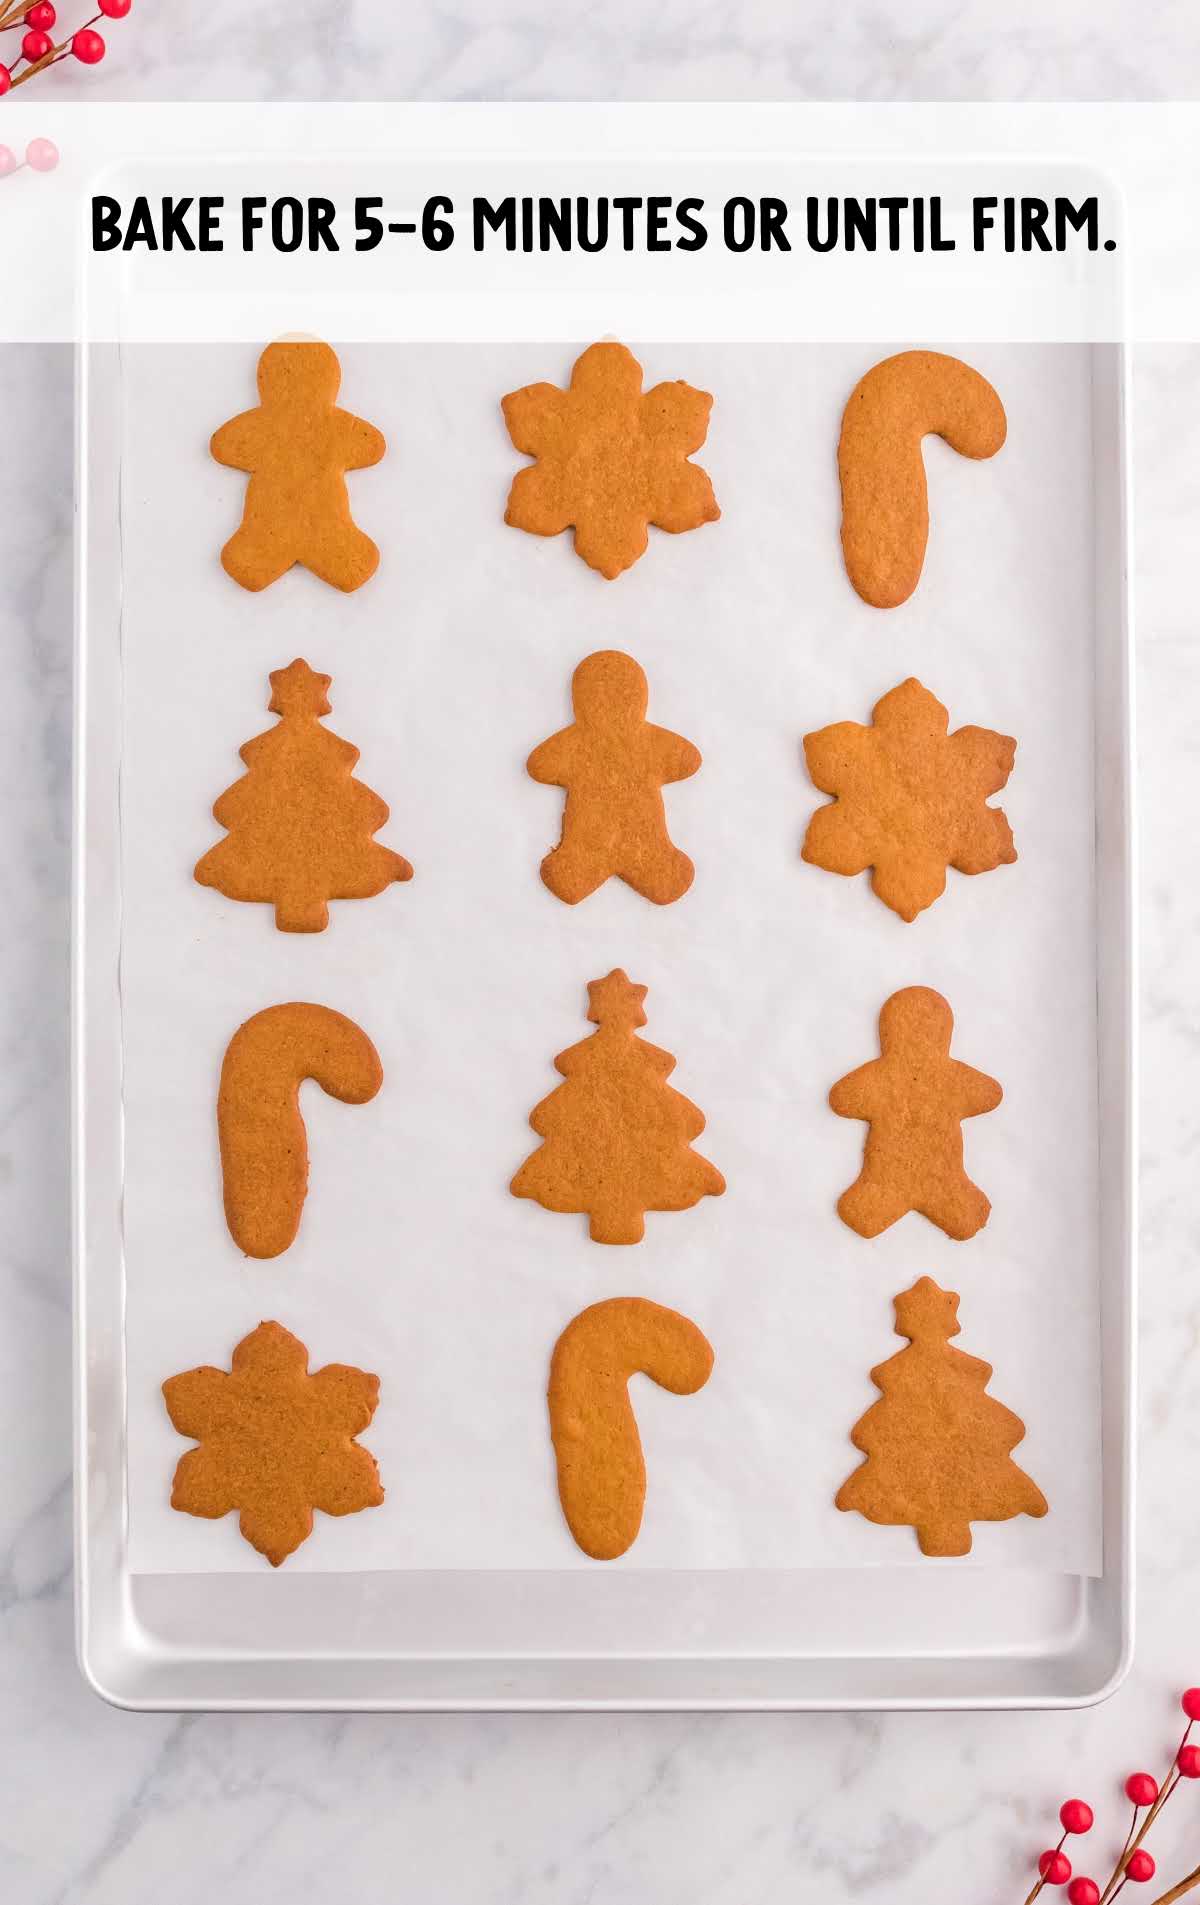 Gingerbread Cookies baked in a baking pan